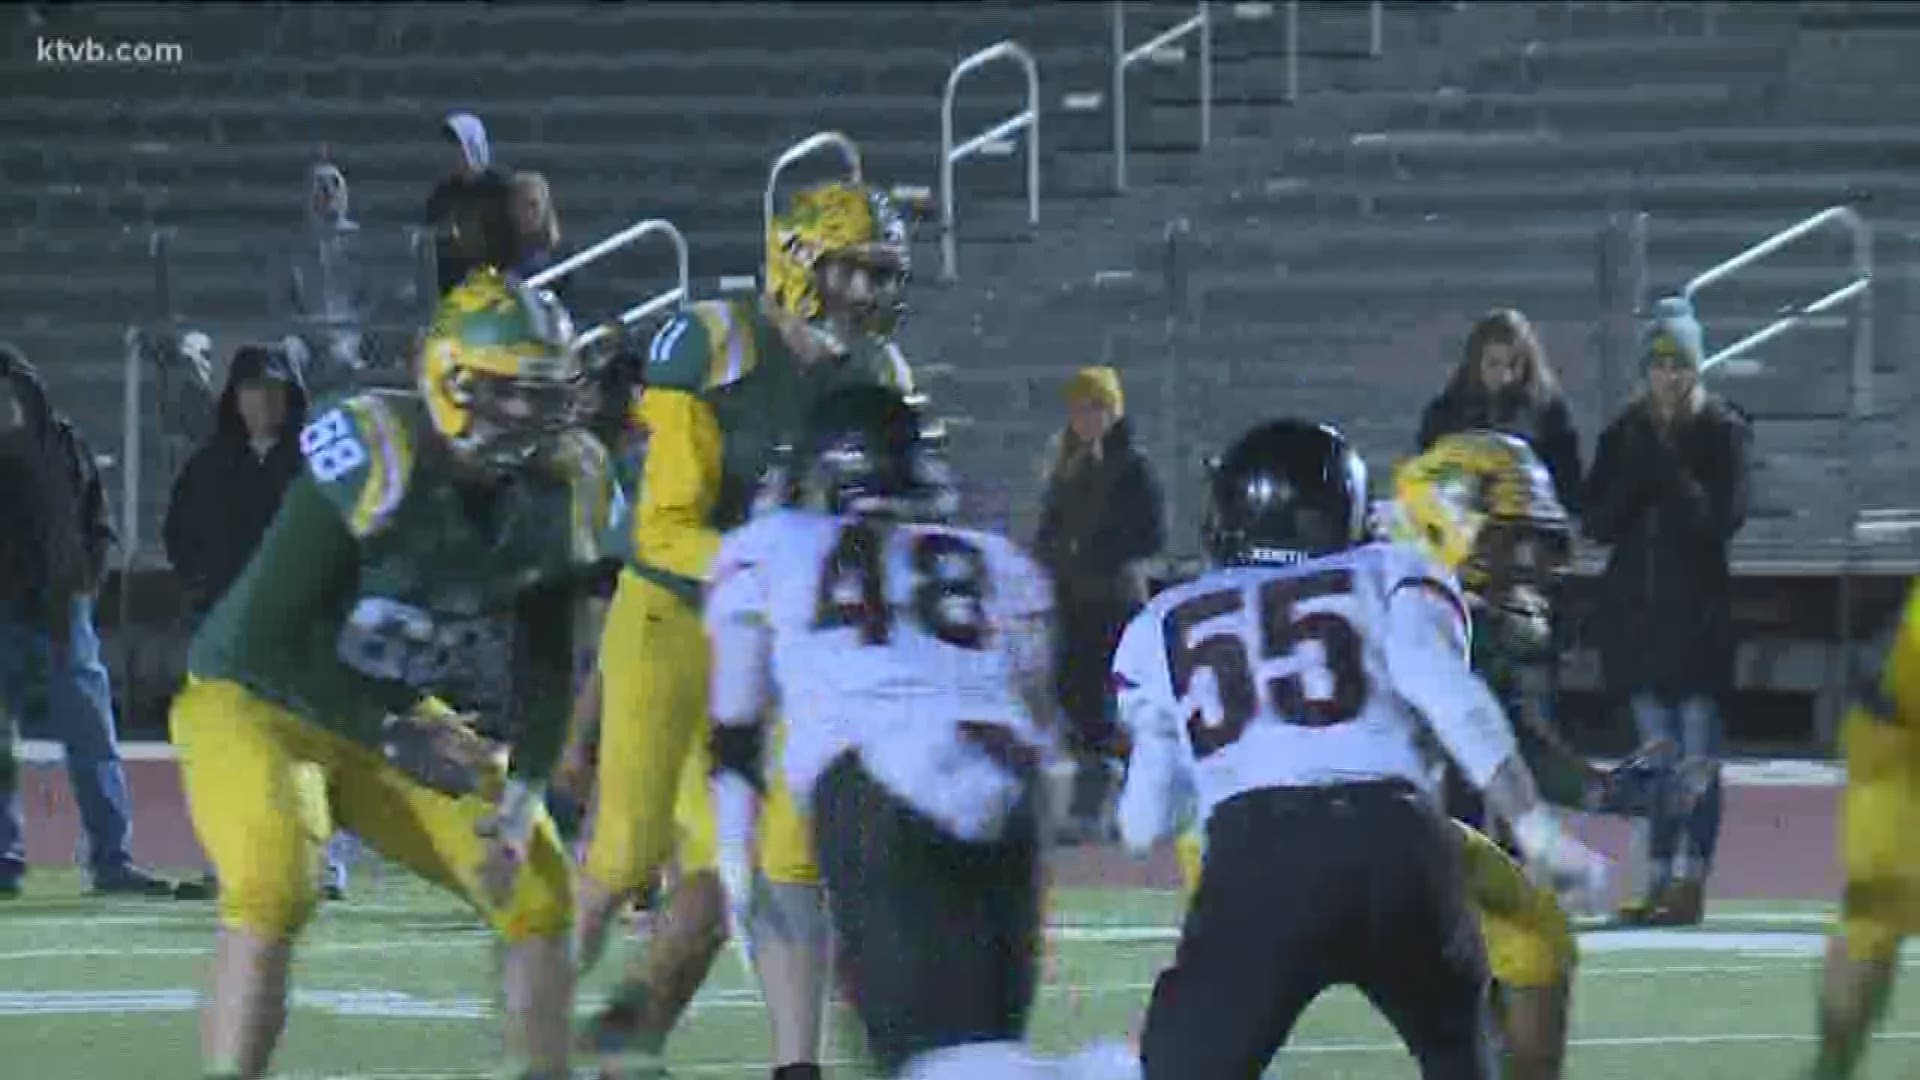 The Rams came into Boise and beat the Lions 27-21 to advance to the state quarterfinals.